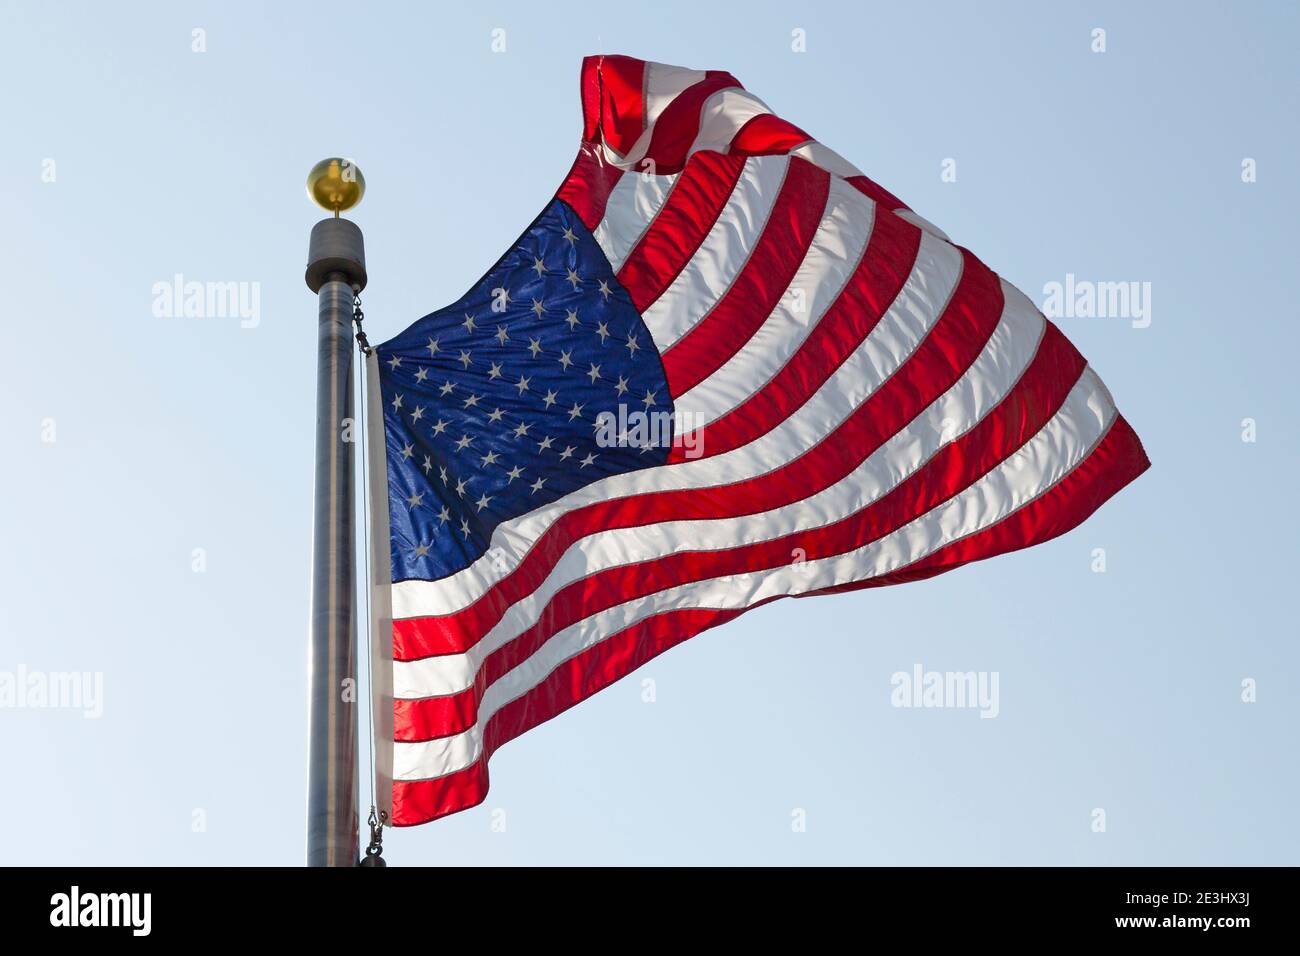 Amerikanische Flagge flattert in Washington DC. Die US-Nationalflagge ist Know The Stars and Stripes, As Old Glory, und das Star-Spangled Banner. Stockfoto